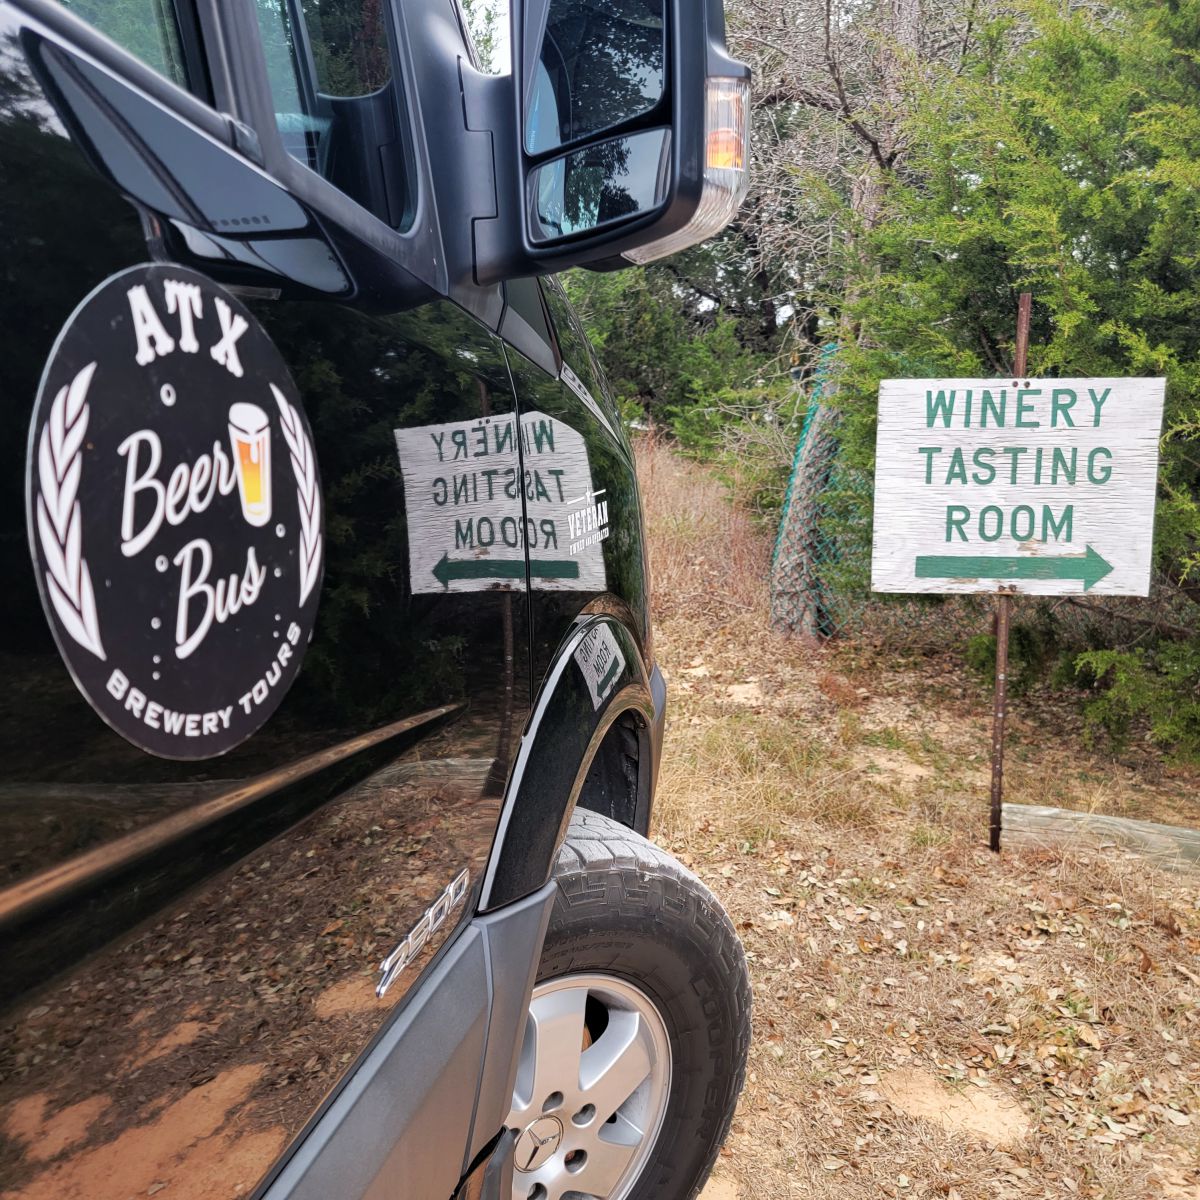 ATX Beer Bus in front of winery tasting room sign